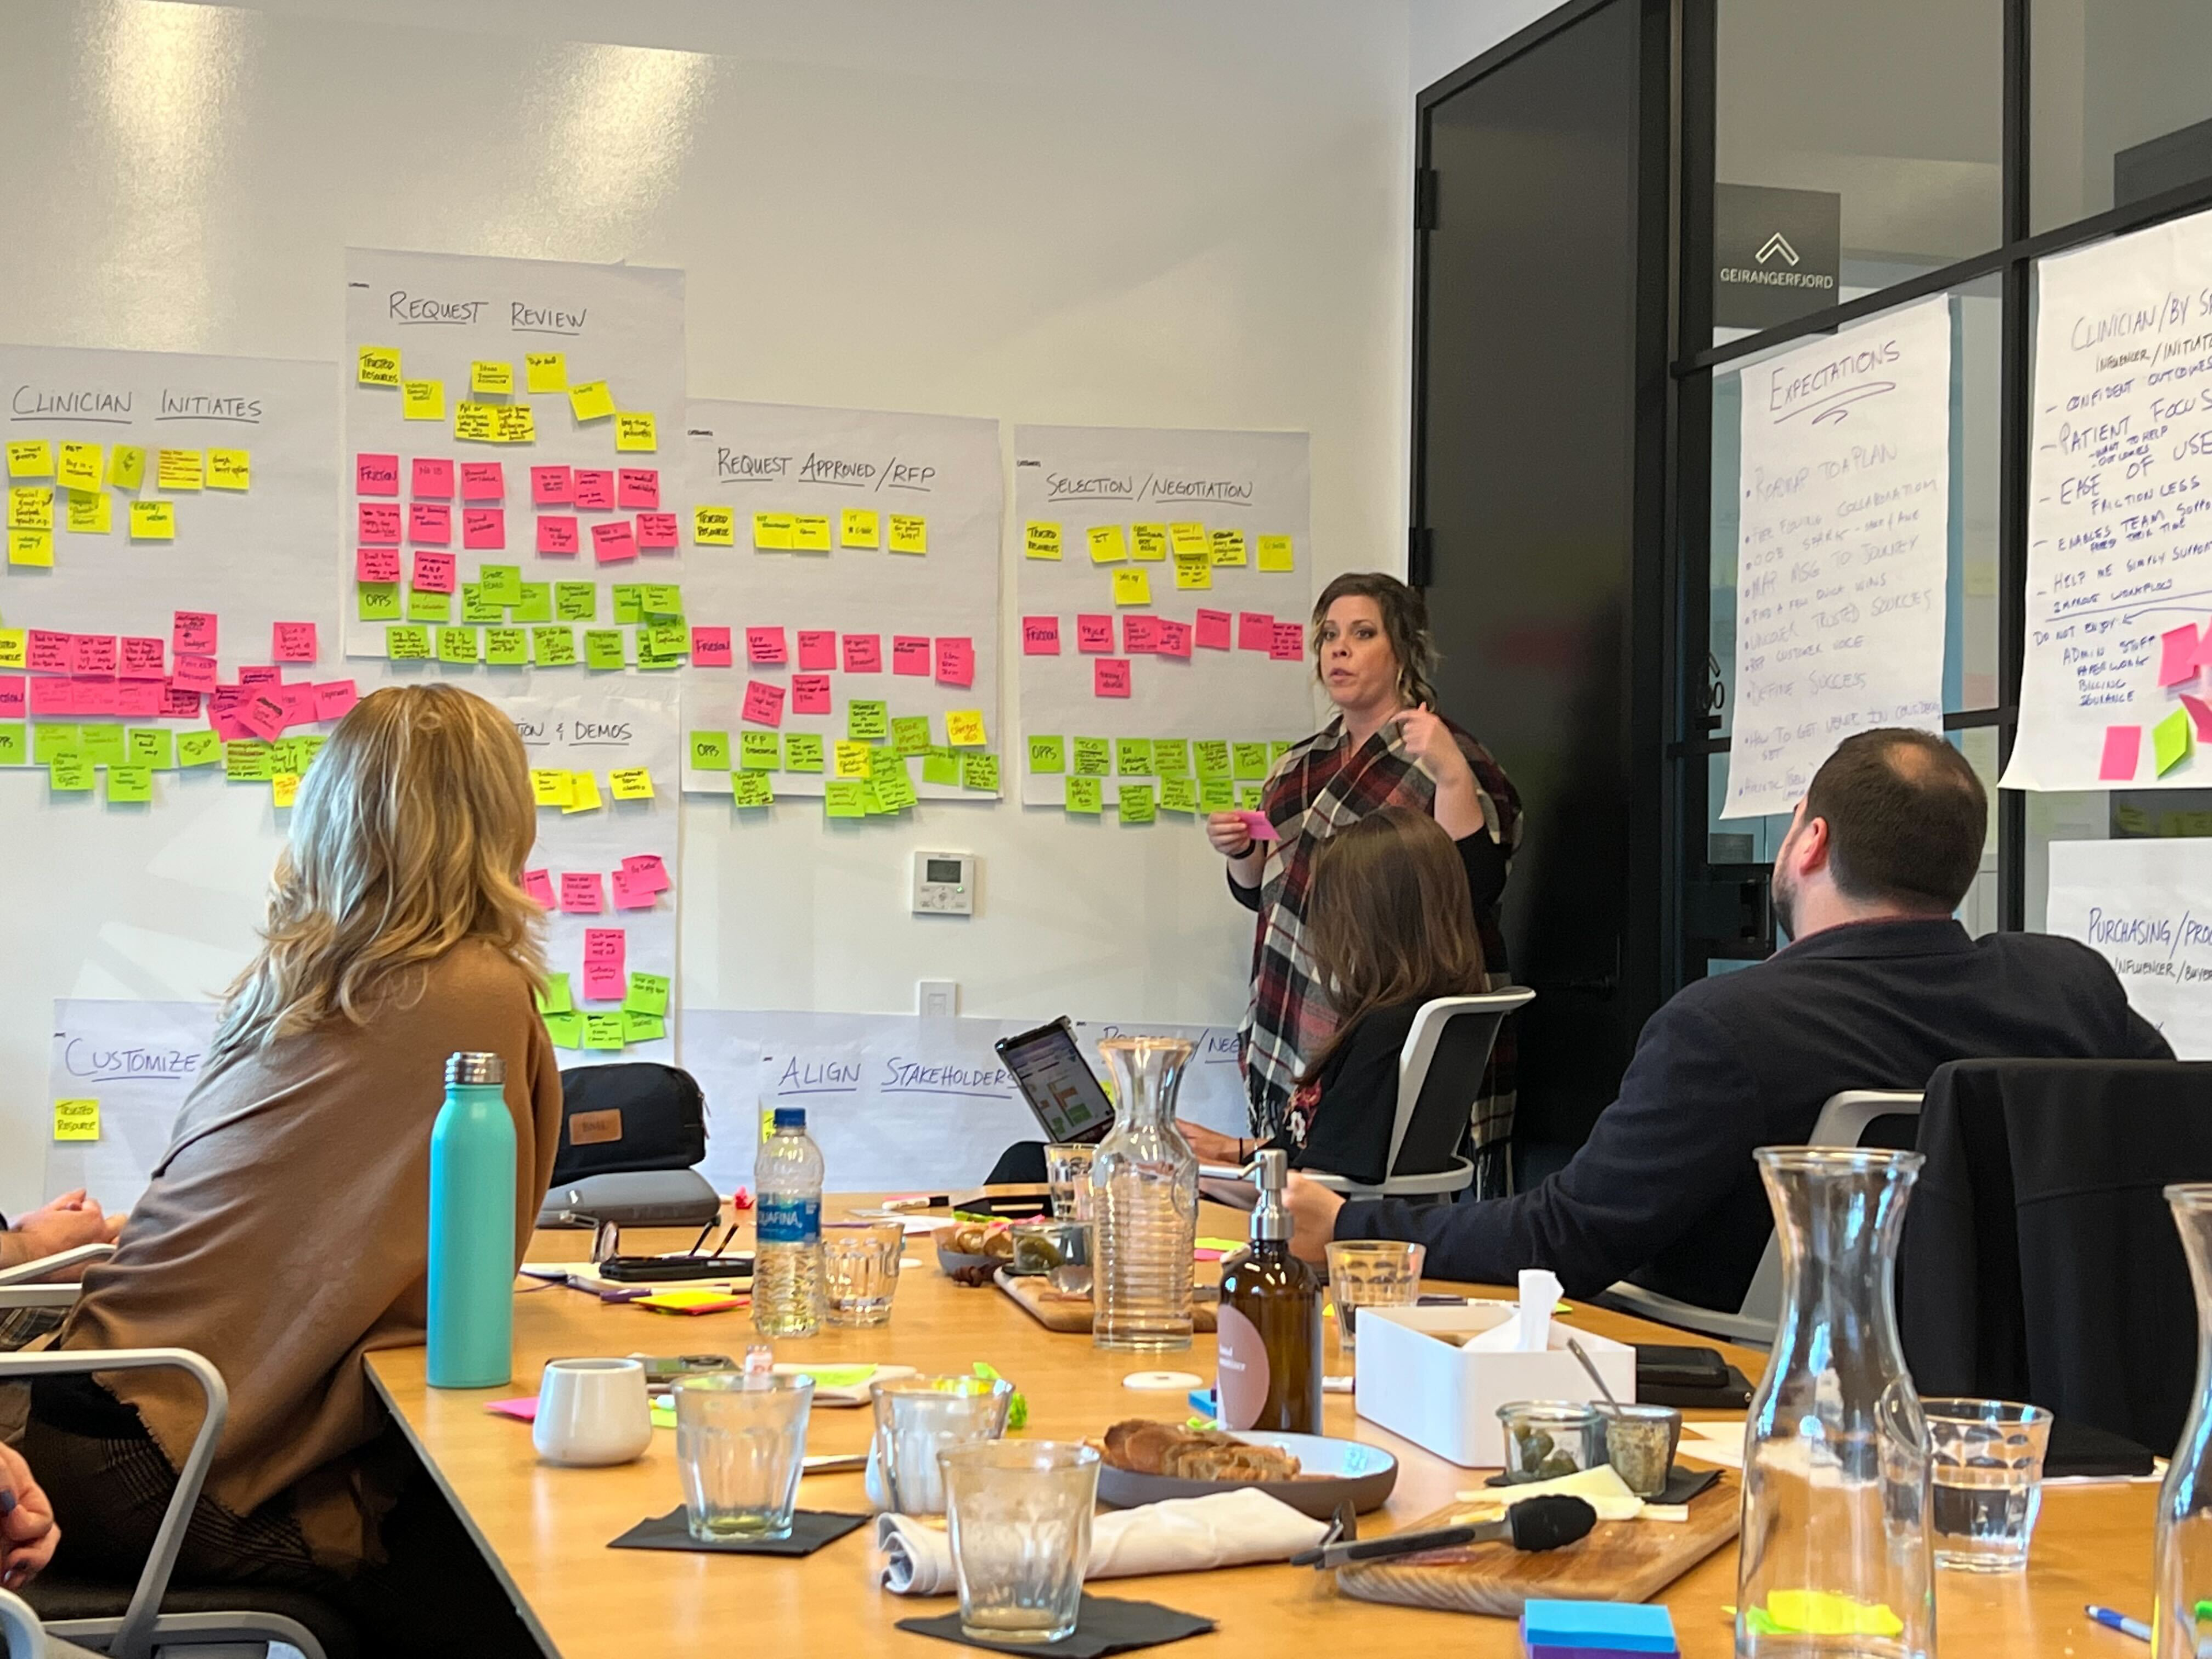 A workshop with 3 people around a table, with lots of post it notes on a wall